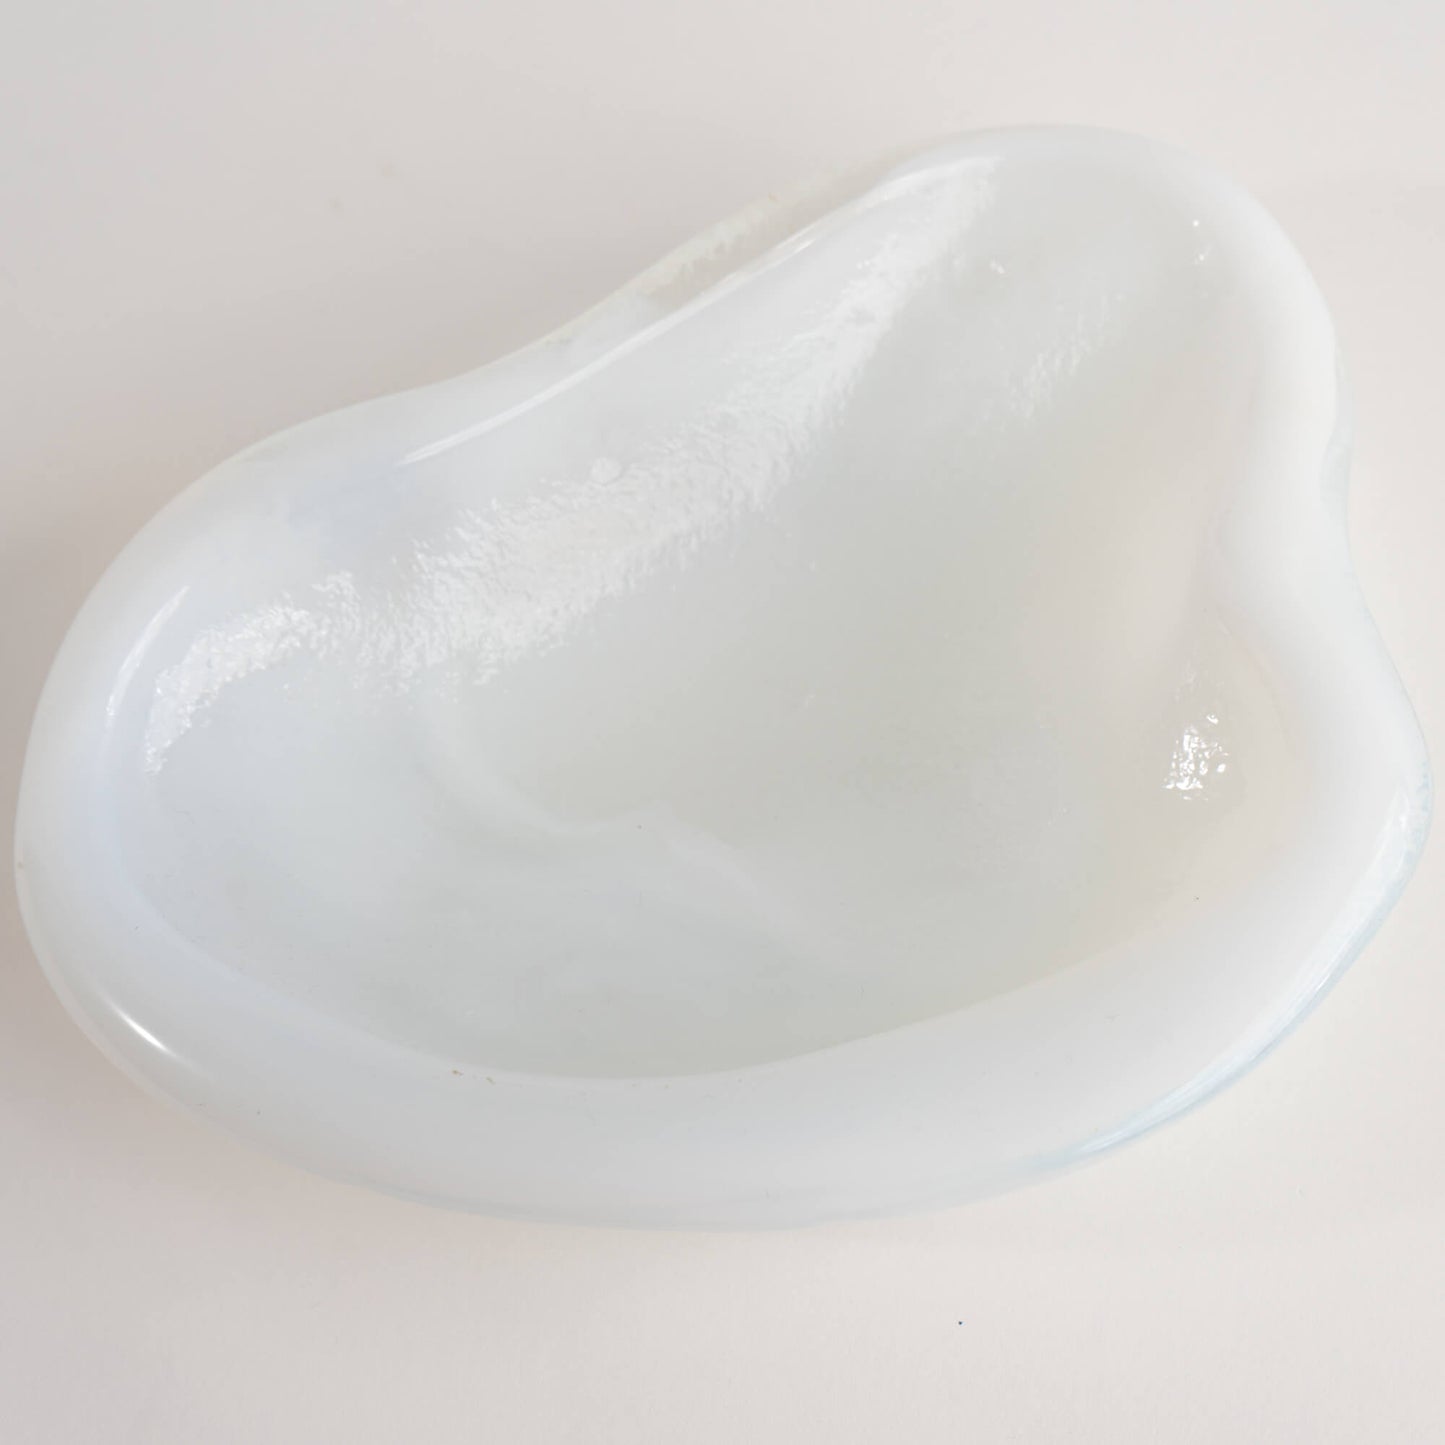 Load image into Gallery viewer, Vintage Blenko Glass Biomorphic Ashtray
